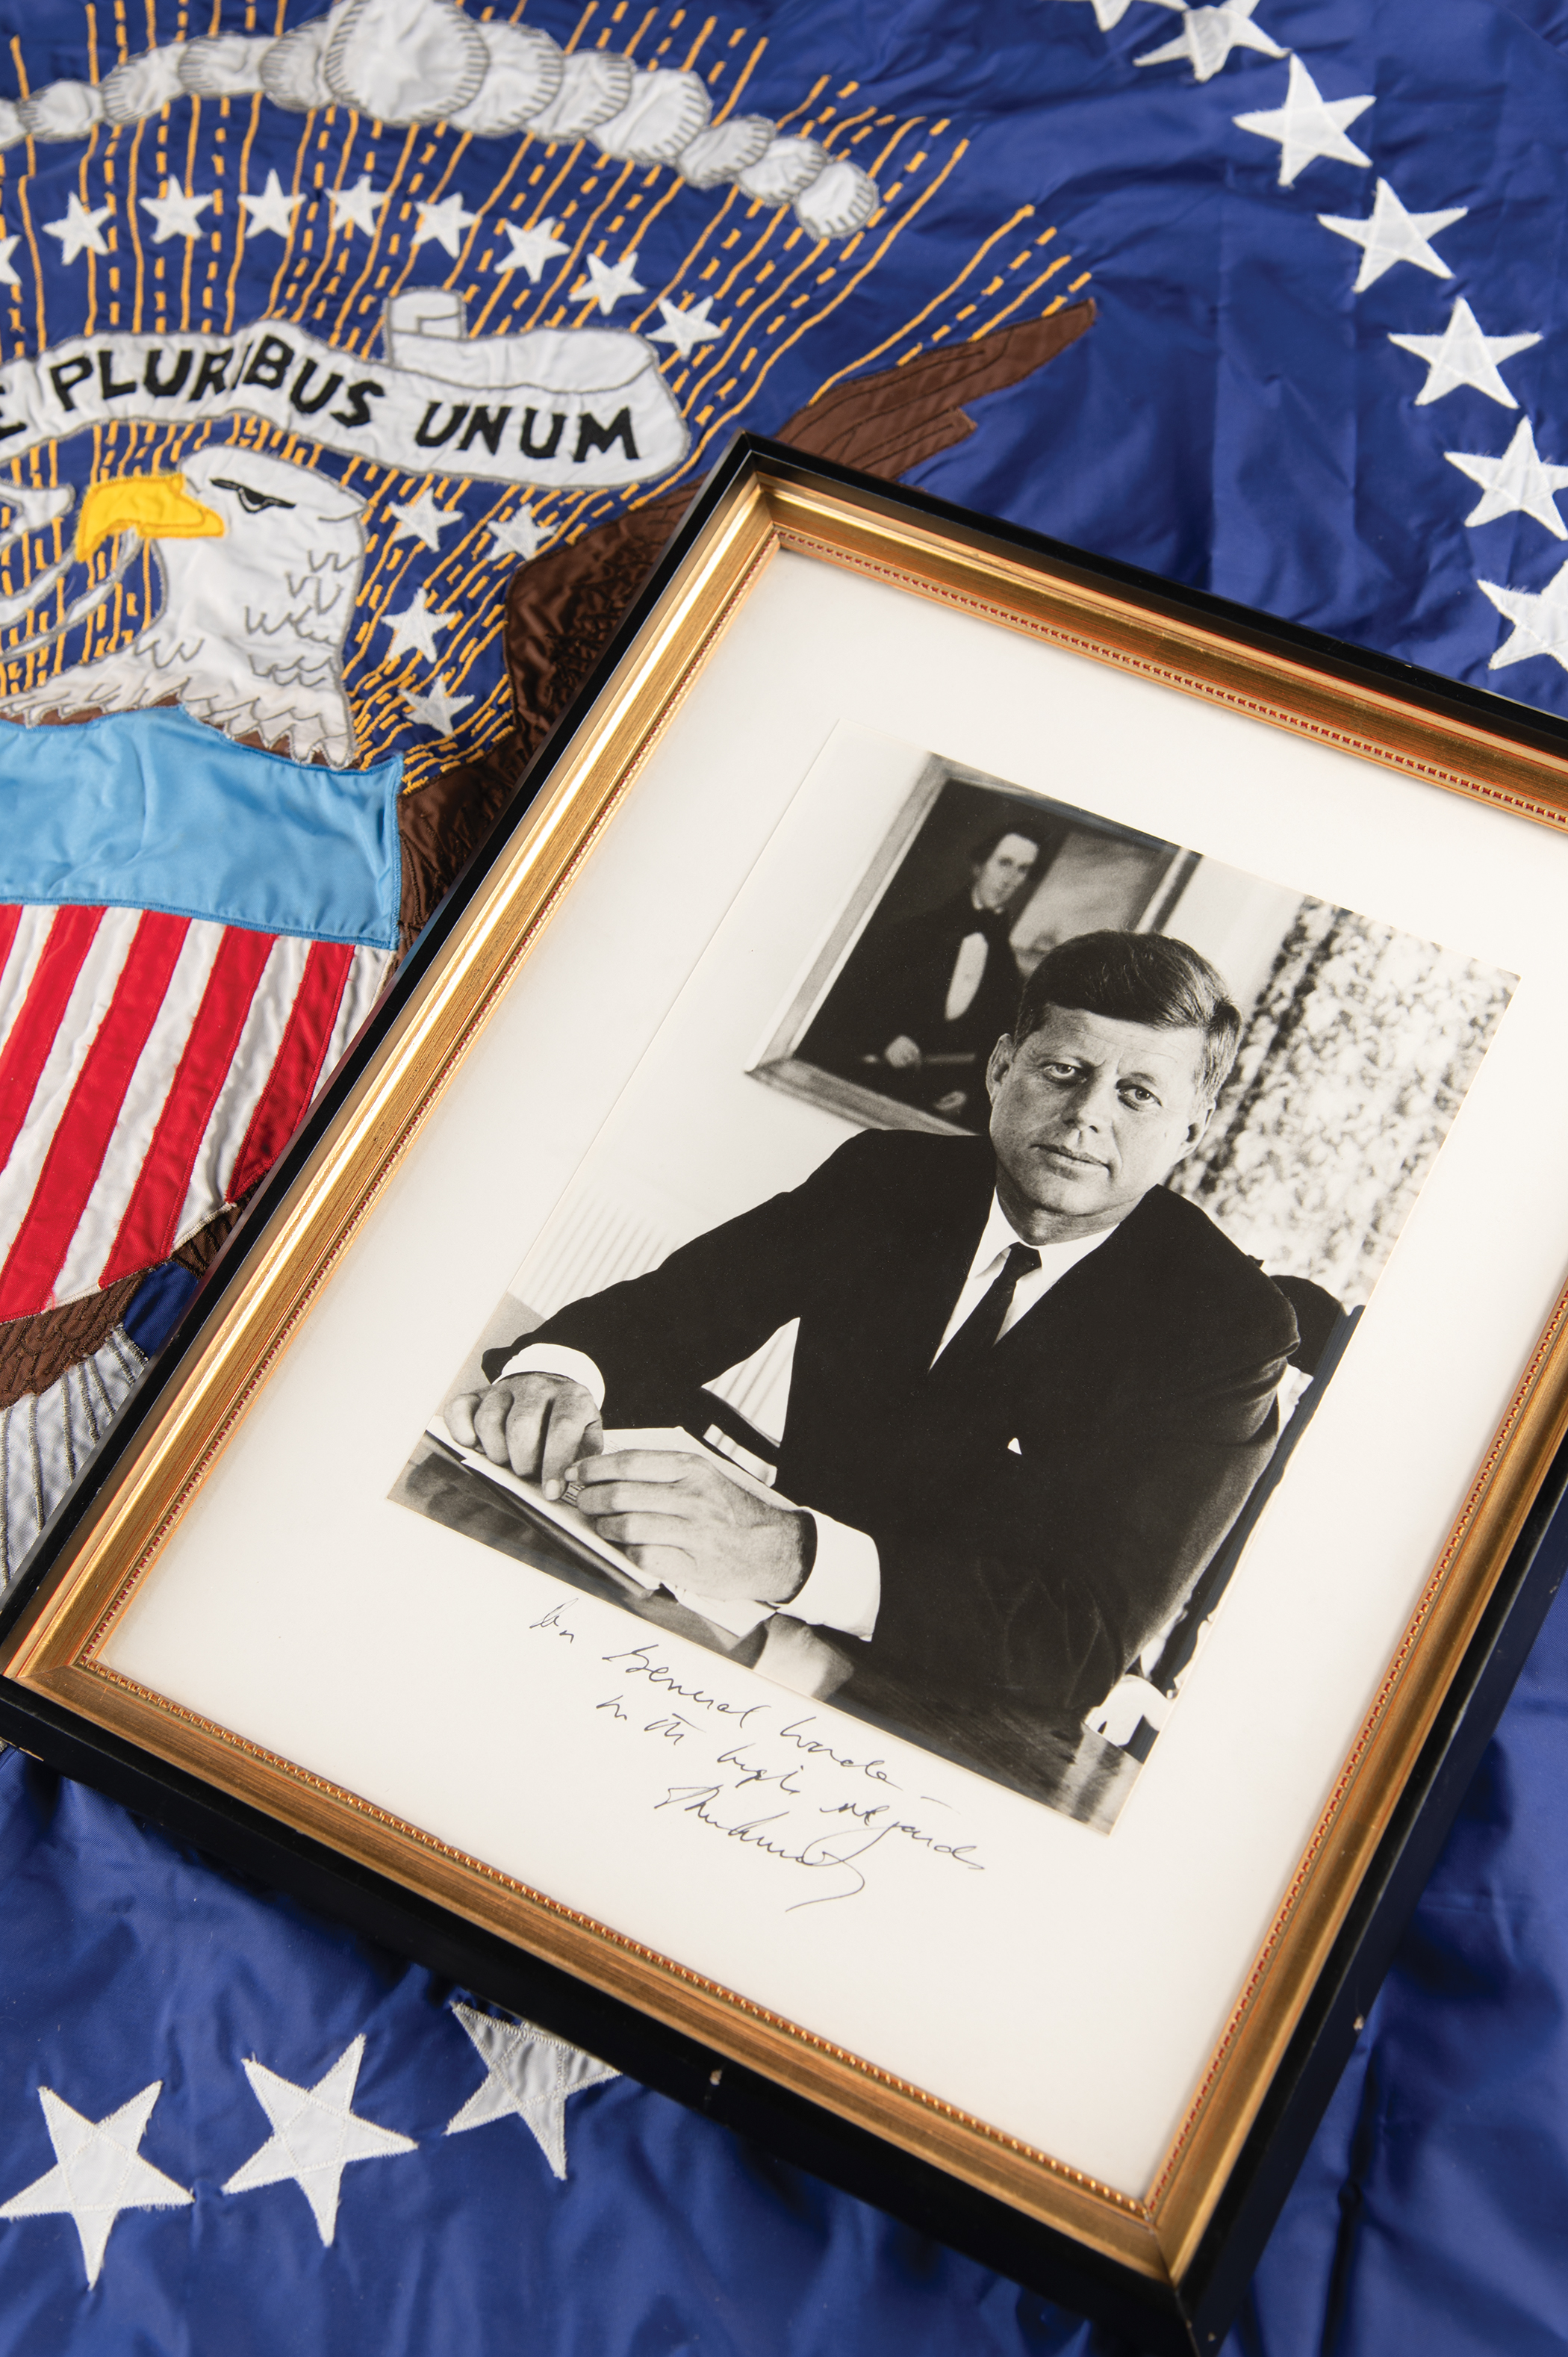 Lot #48 President John F. Kennedy Signed Photograph and Presidential Seal Flag Presented to the Commander of the Marine Corps Recruit Depot - Image 1